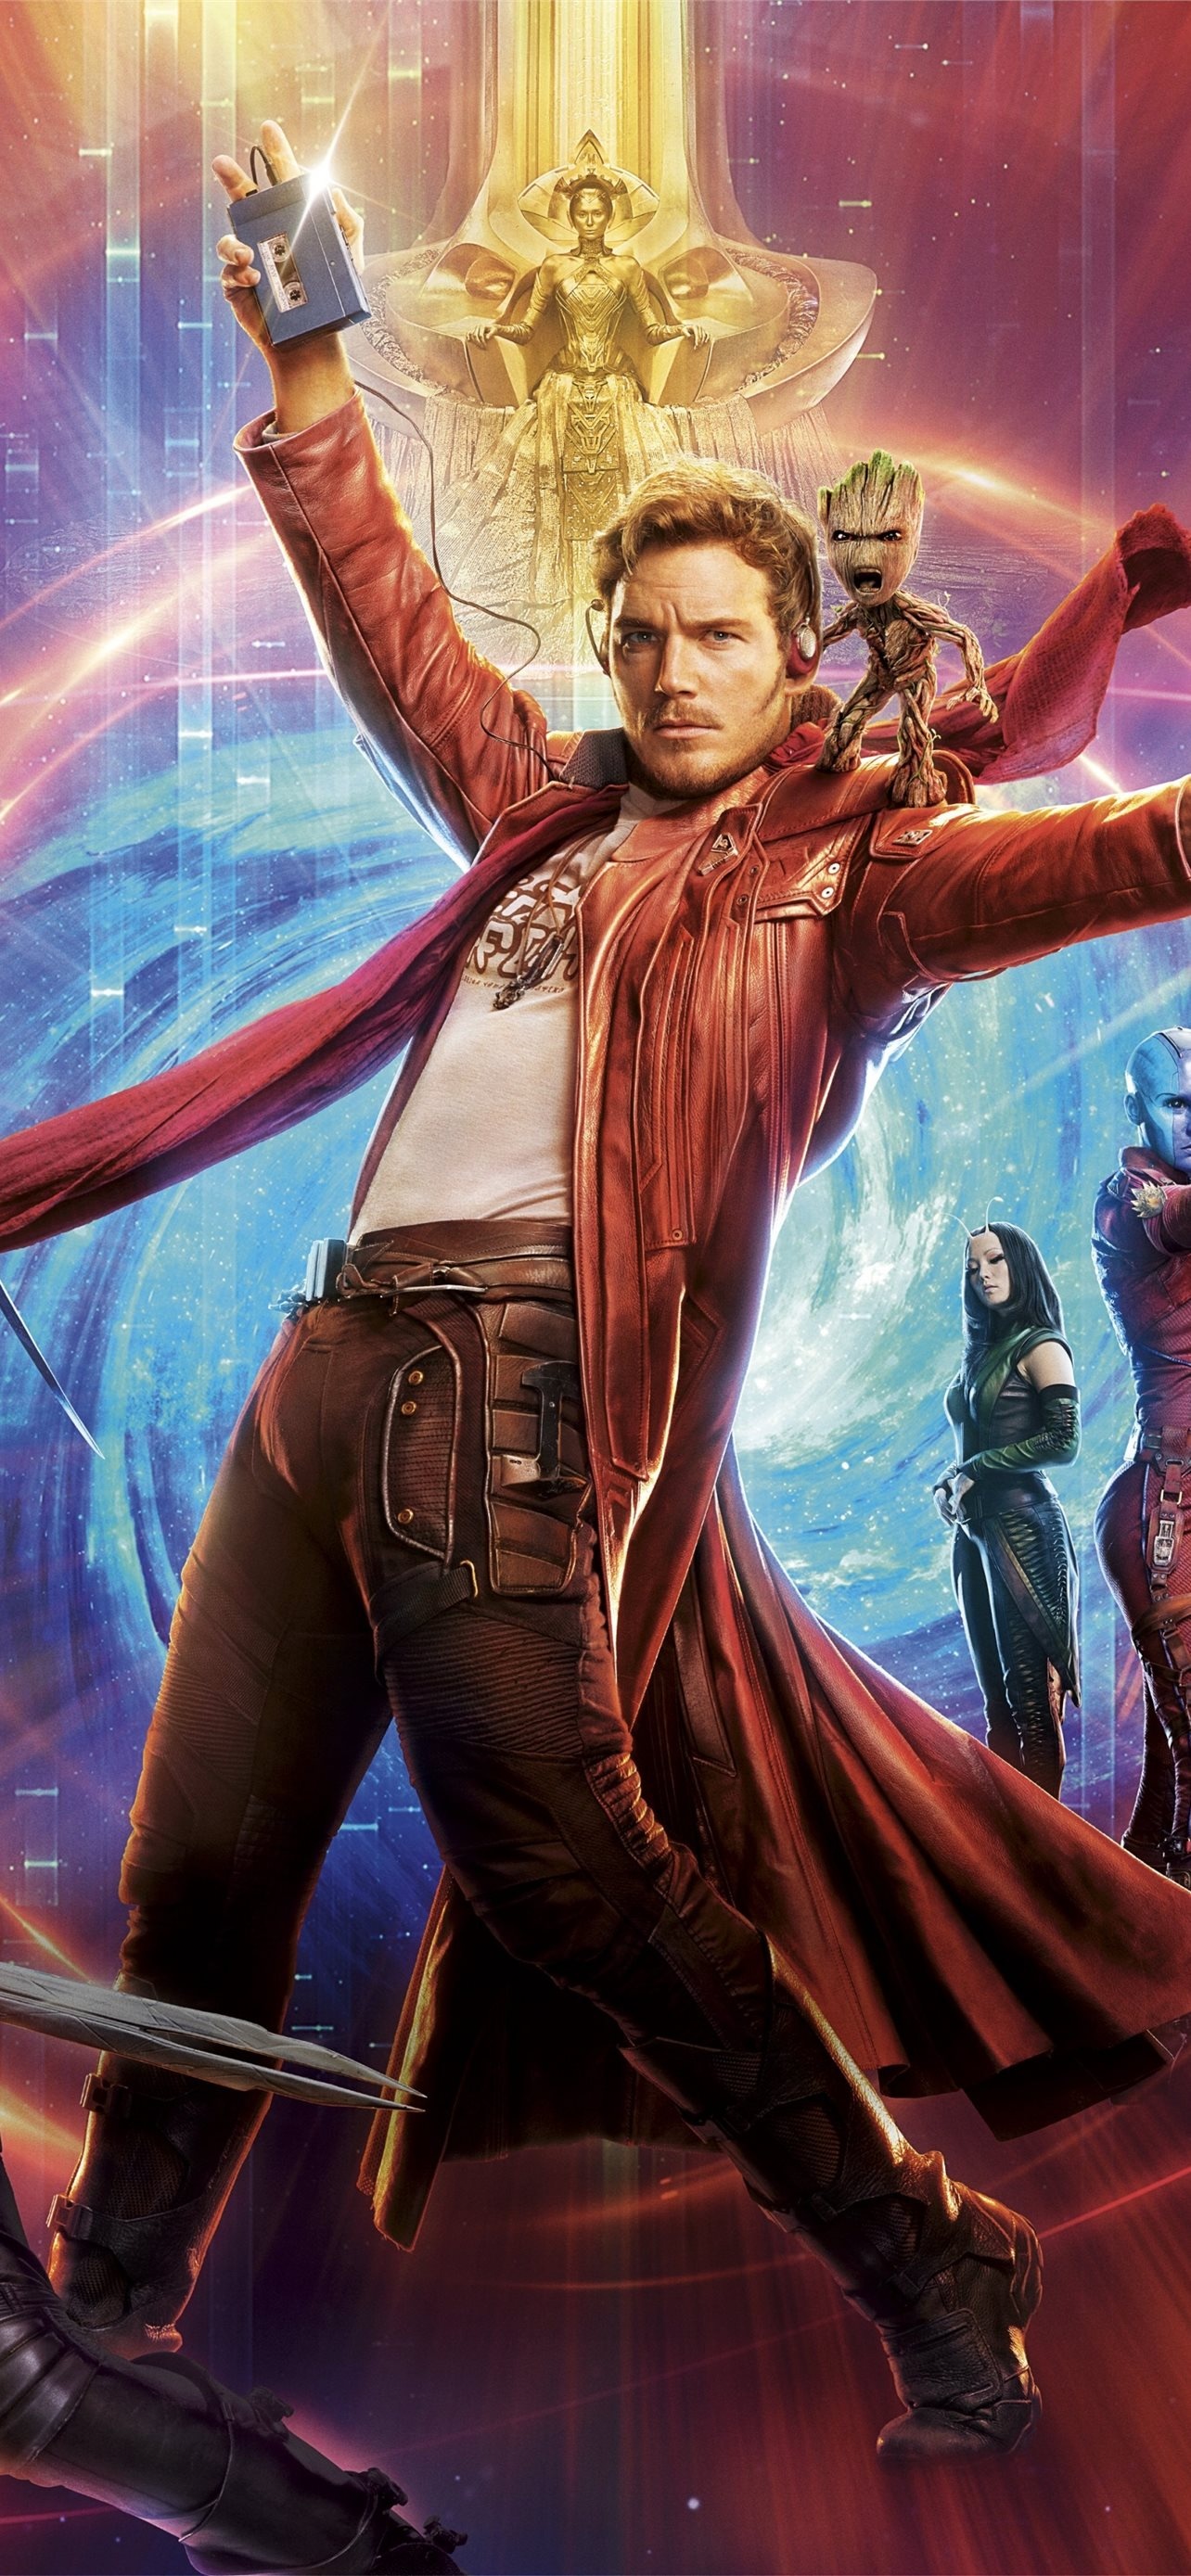 Chris Pratt: Starred as Star-Lord in the Marvel Cinematic Universe, Guardians of the Galaxy. 1290x2780 HD Background.